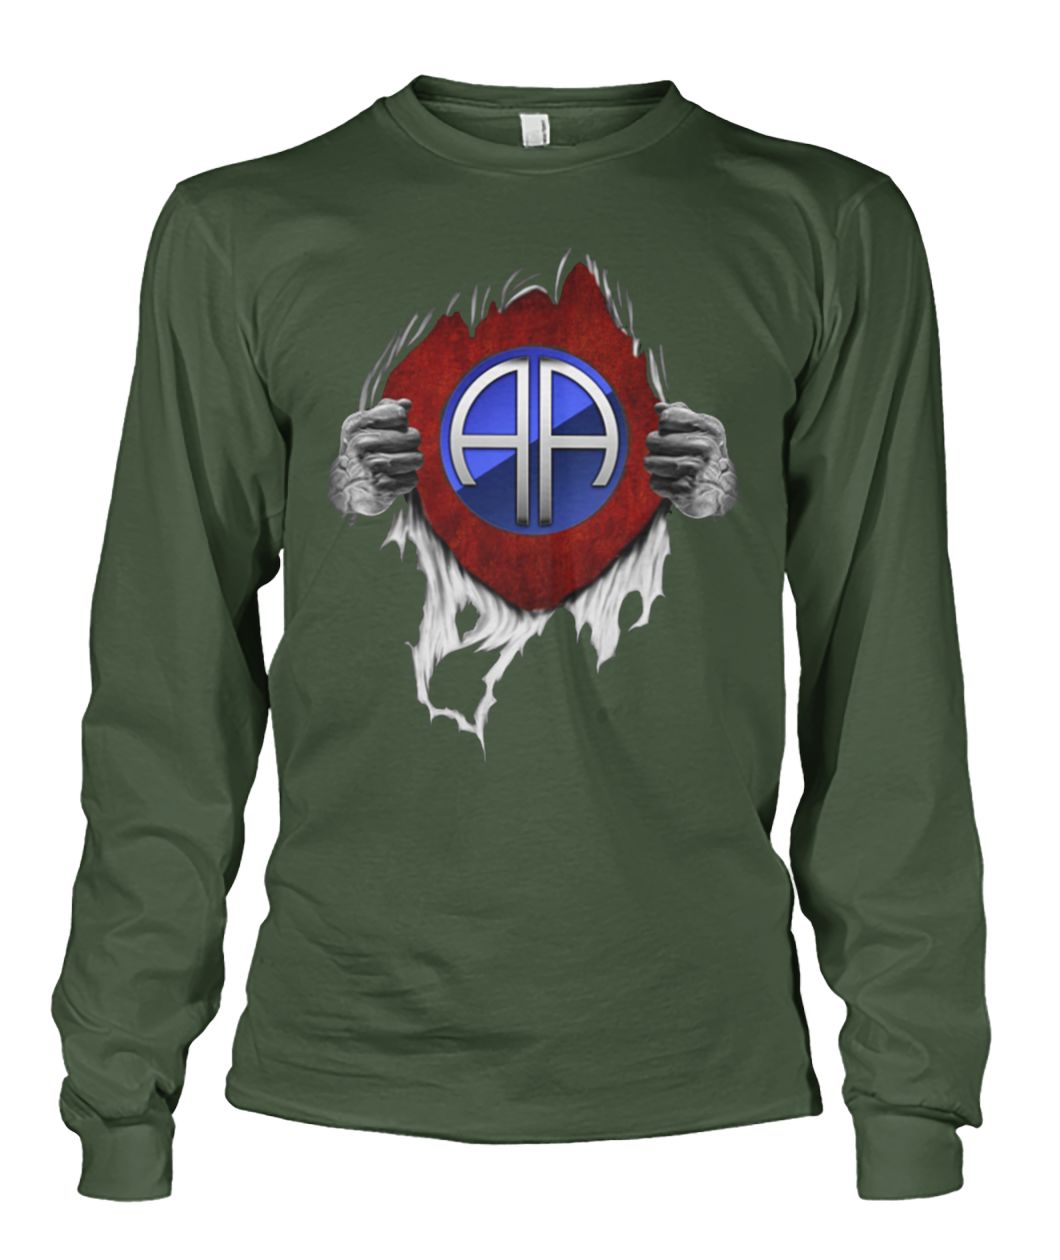 82nd airborne division inside me unisex long sleeve